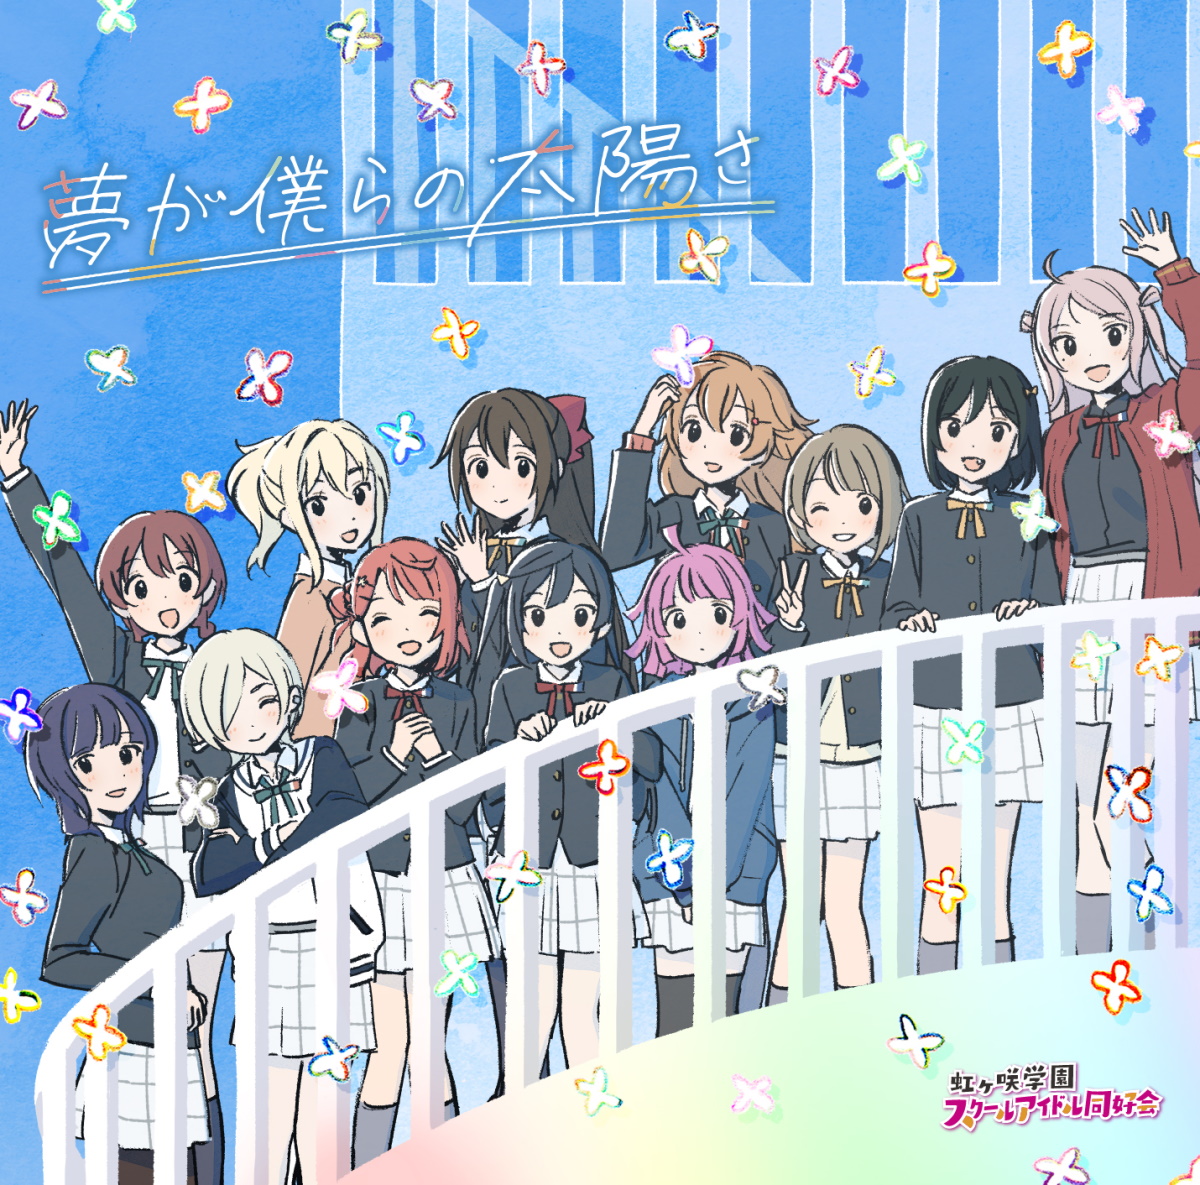 Cover art for『Nijigasaki High School Idol Club - Ryouran! Victory Road』from the release『TV Anime 